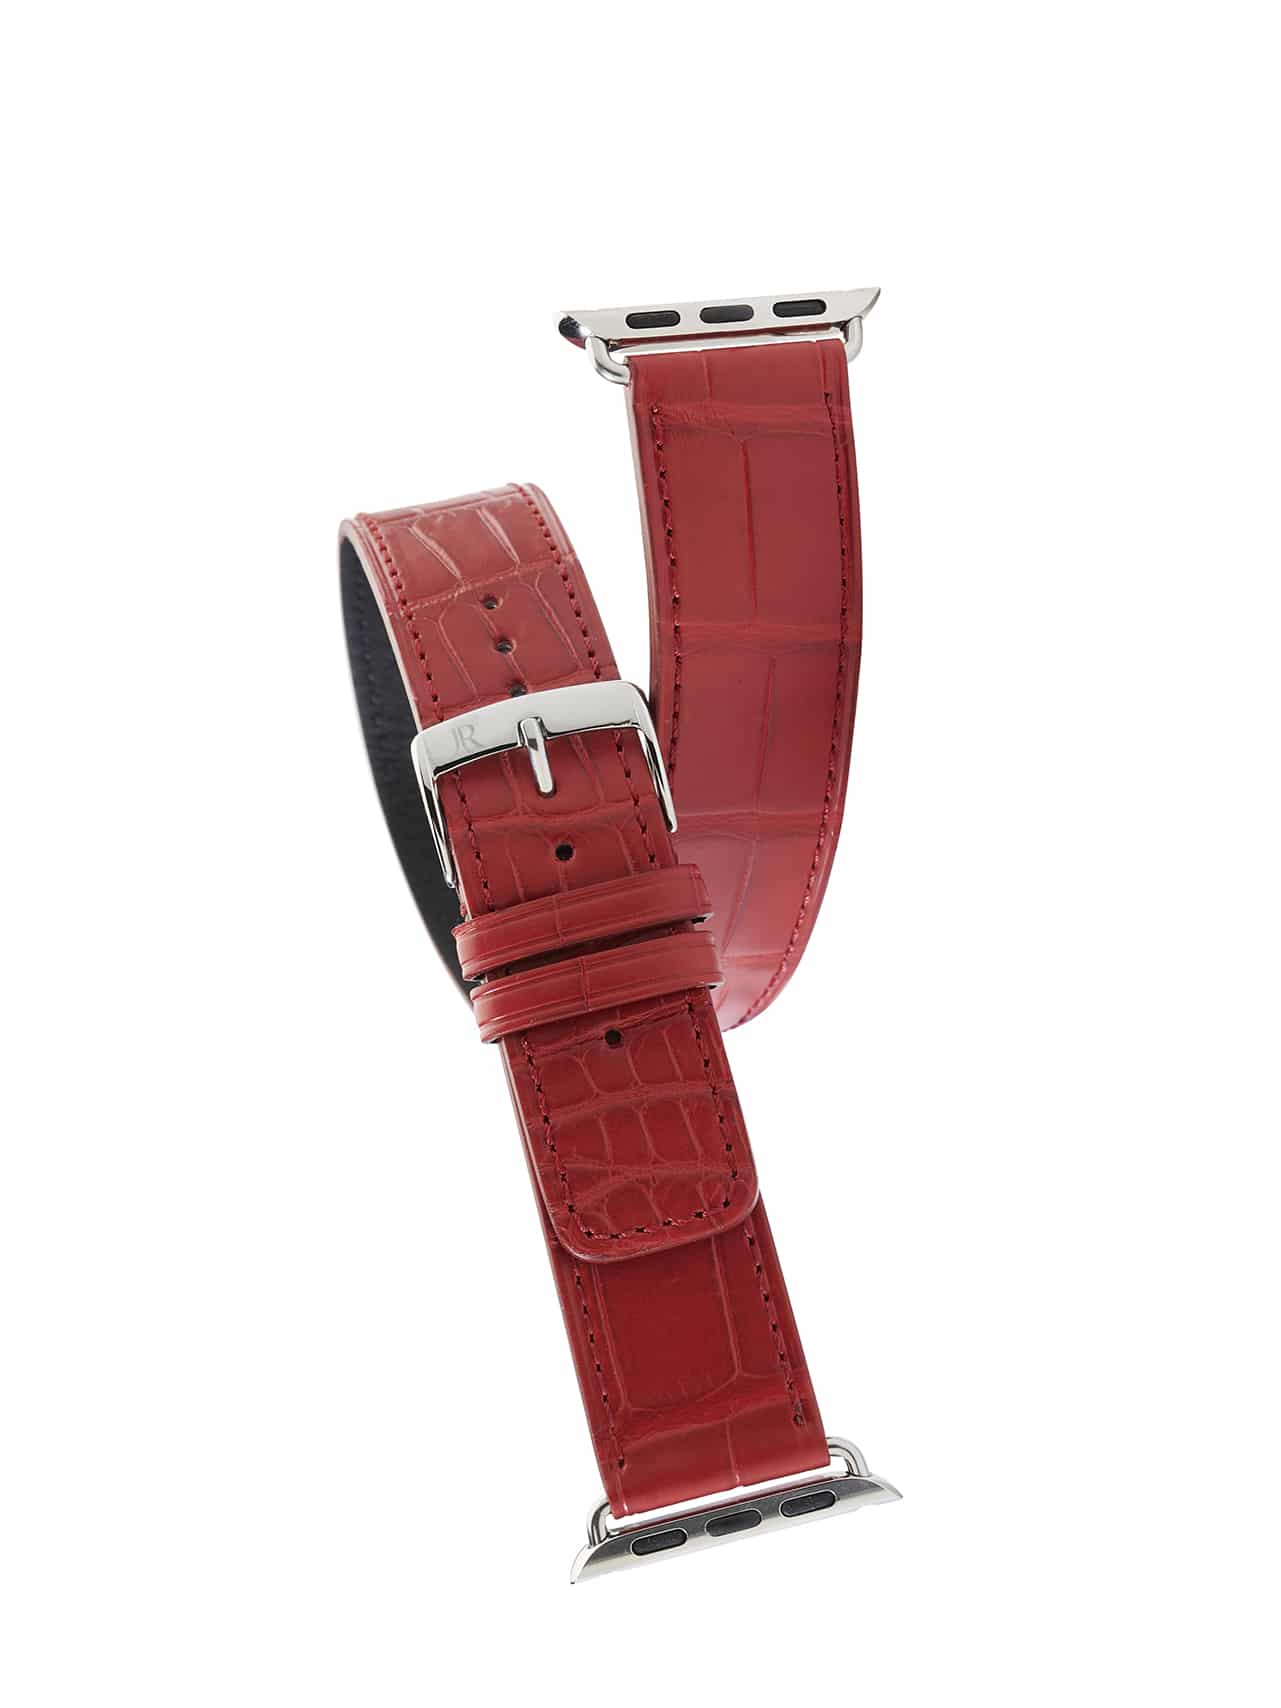 Apple Watch double band Alligator red bright Women